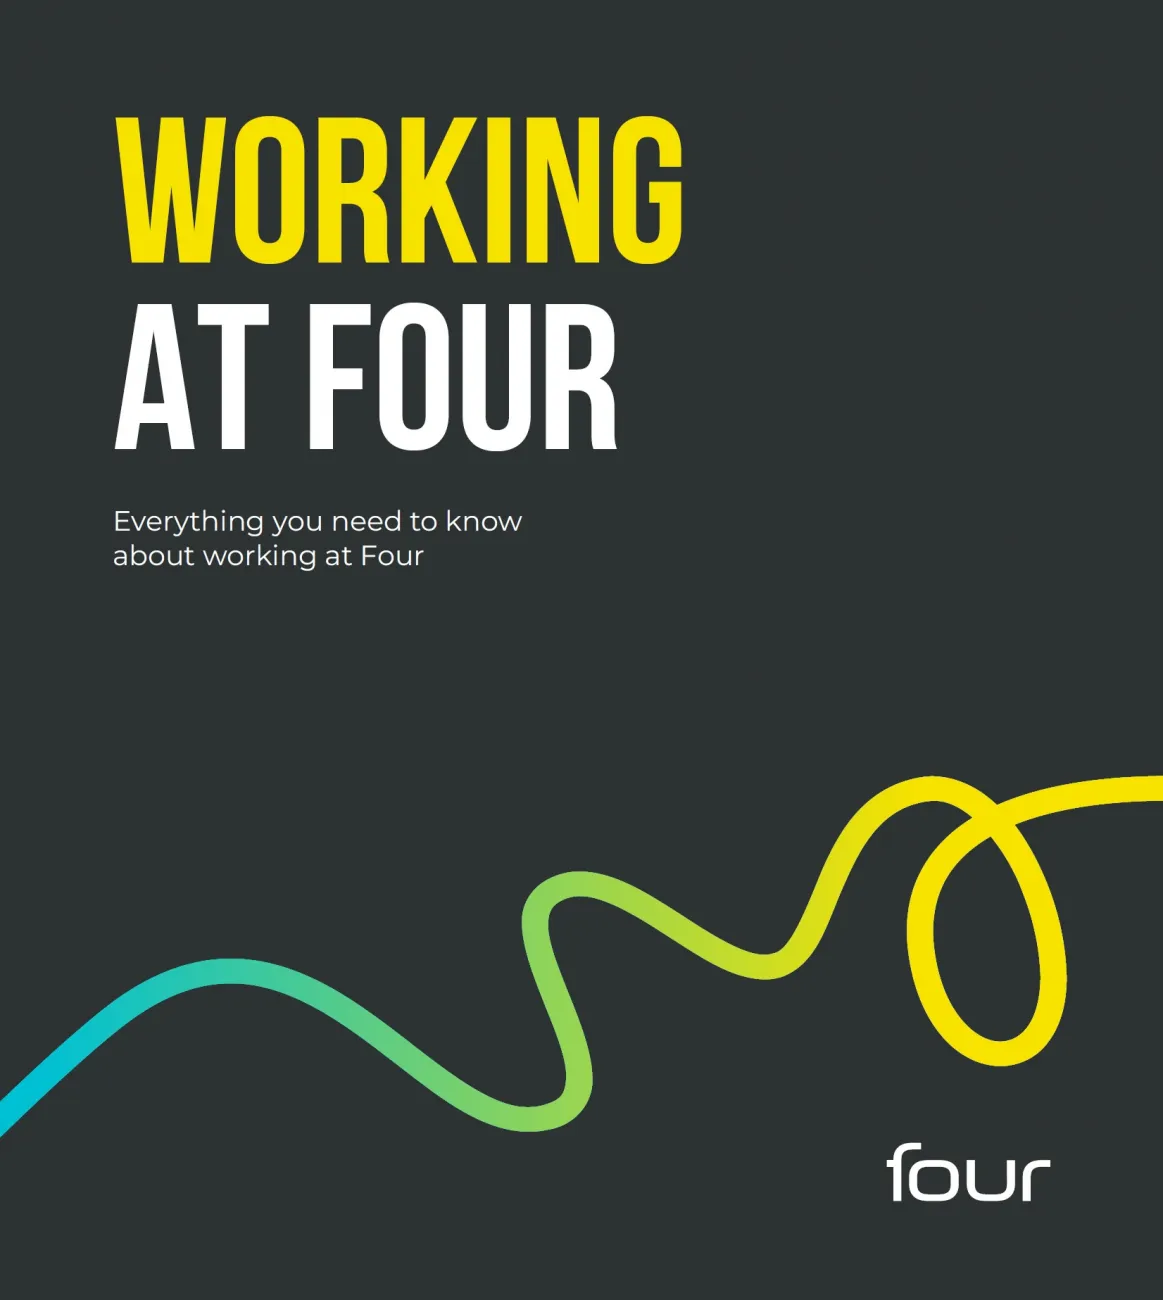 The front cover of a brochure about working at Four